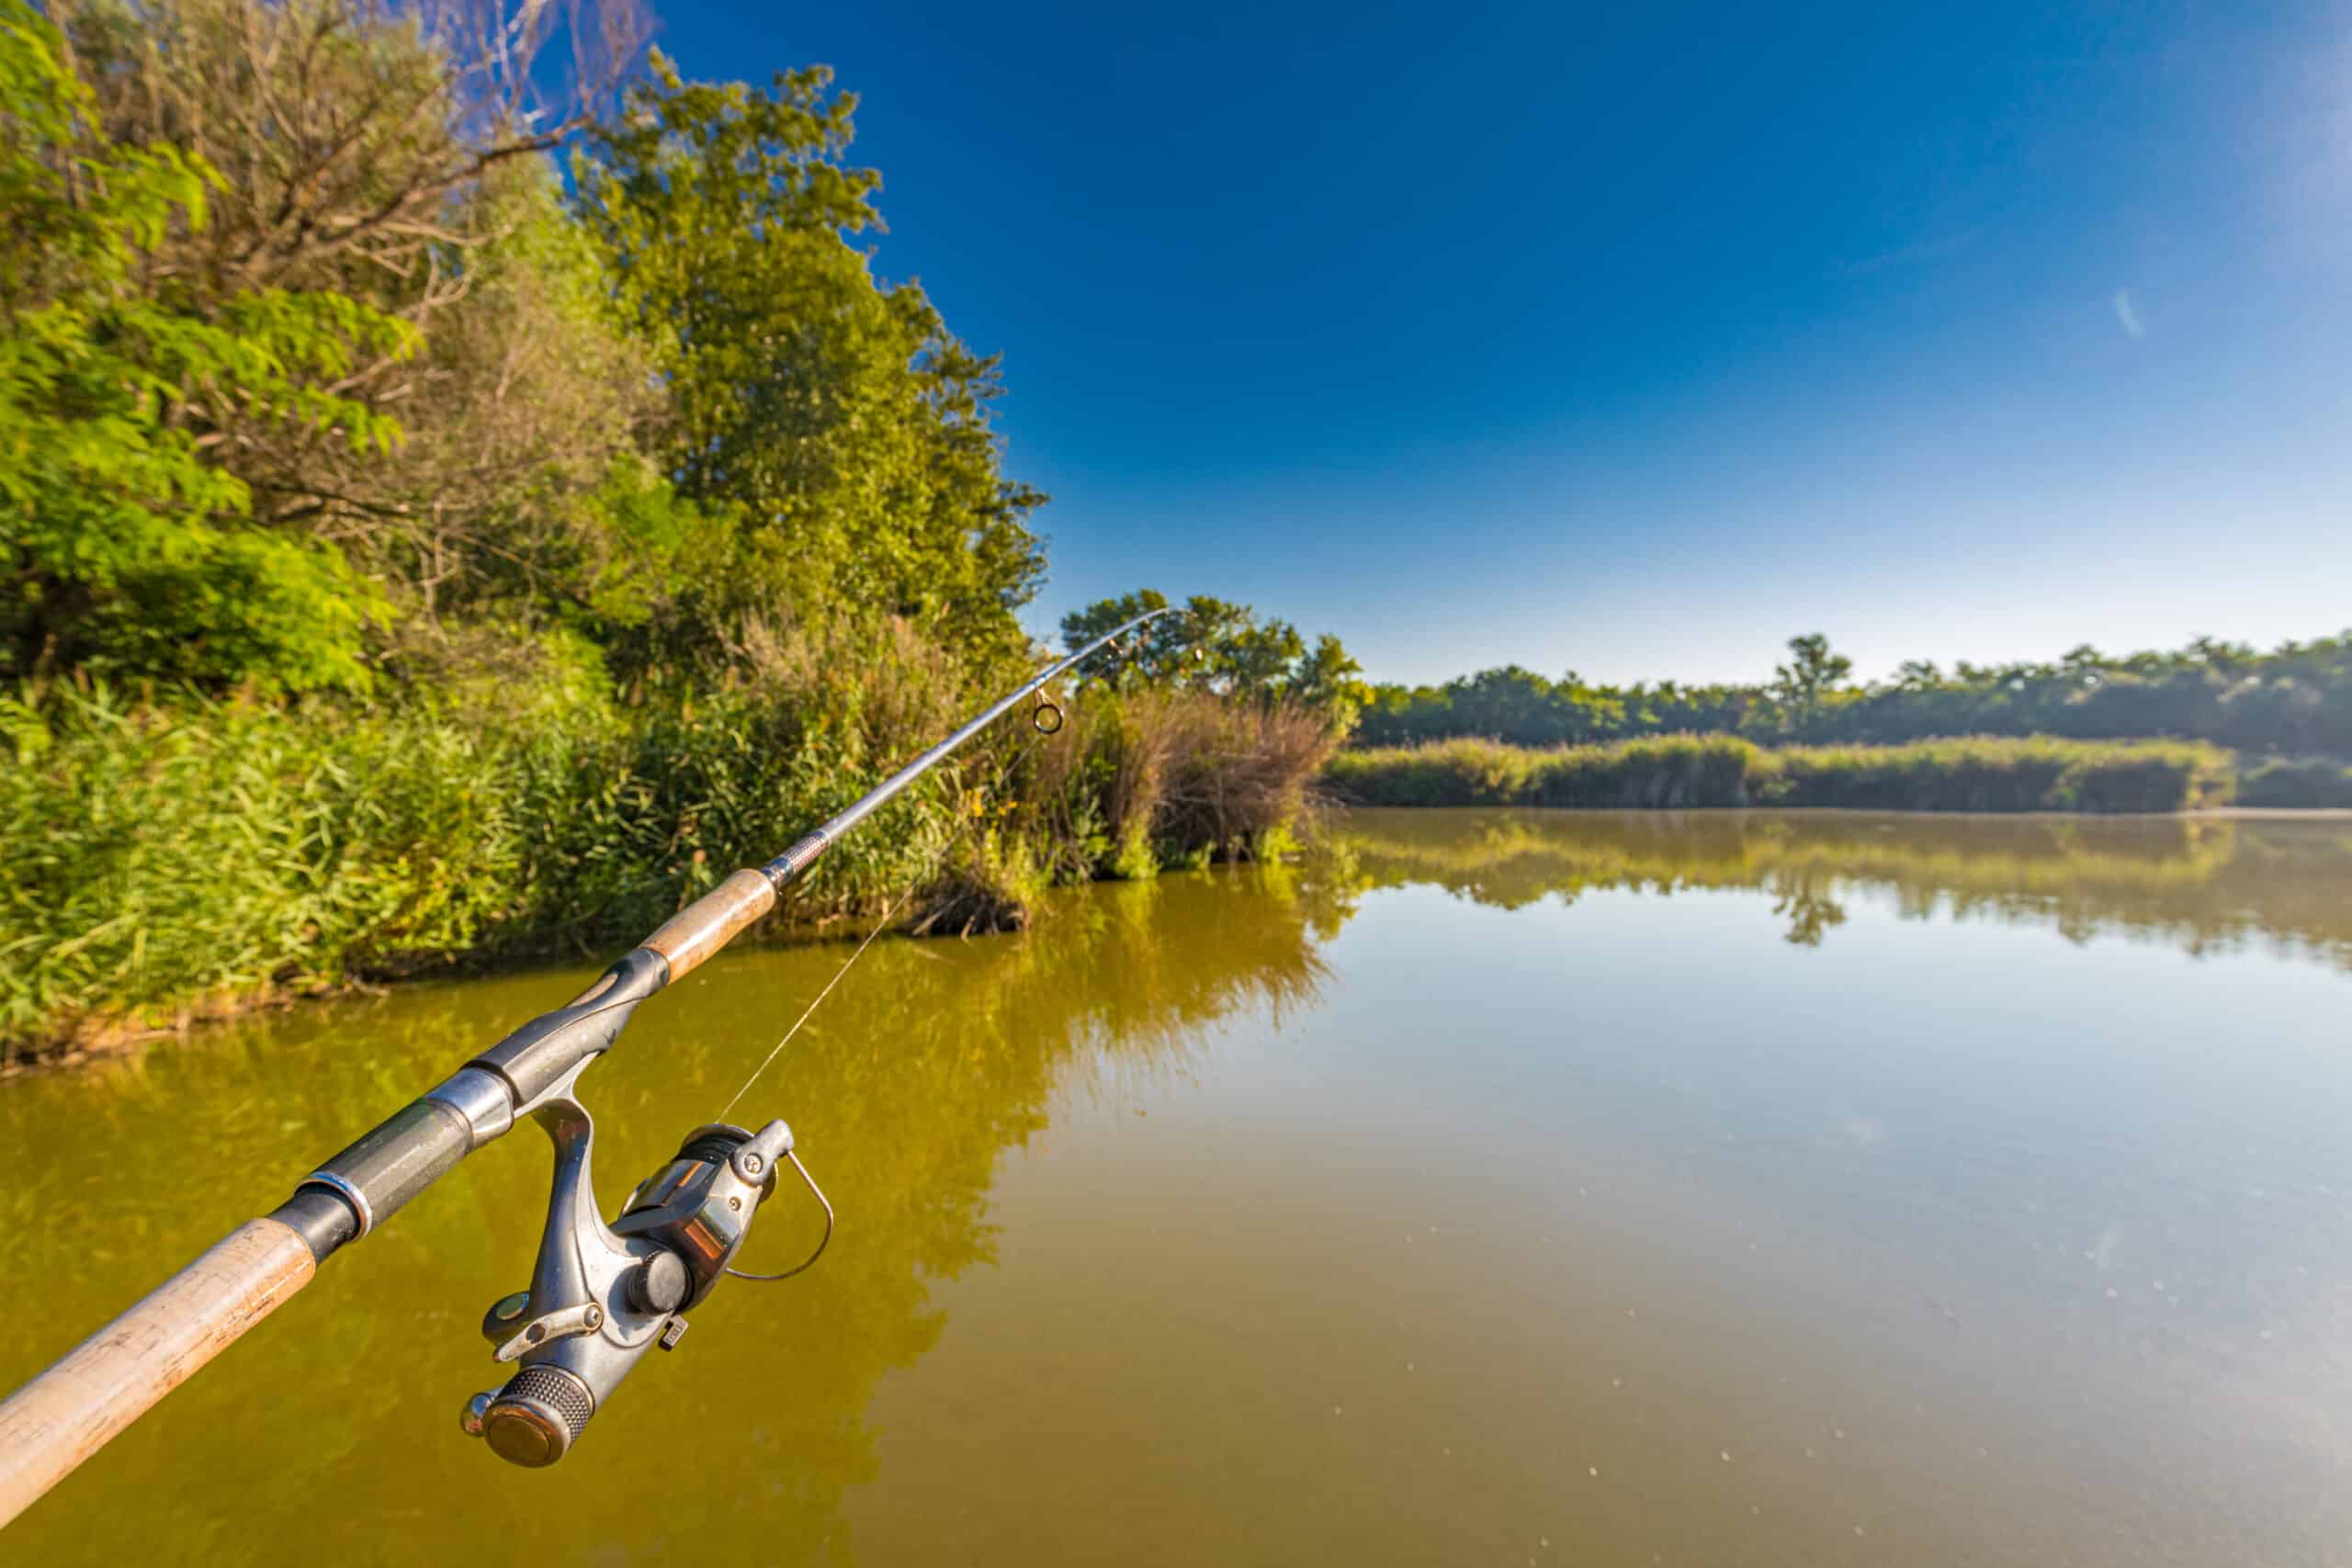 fanatic4fishing.com : How much does a Texas fishing license cost?